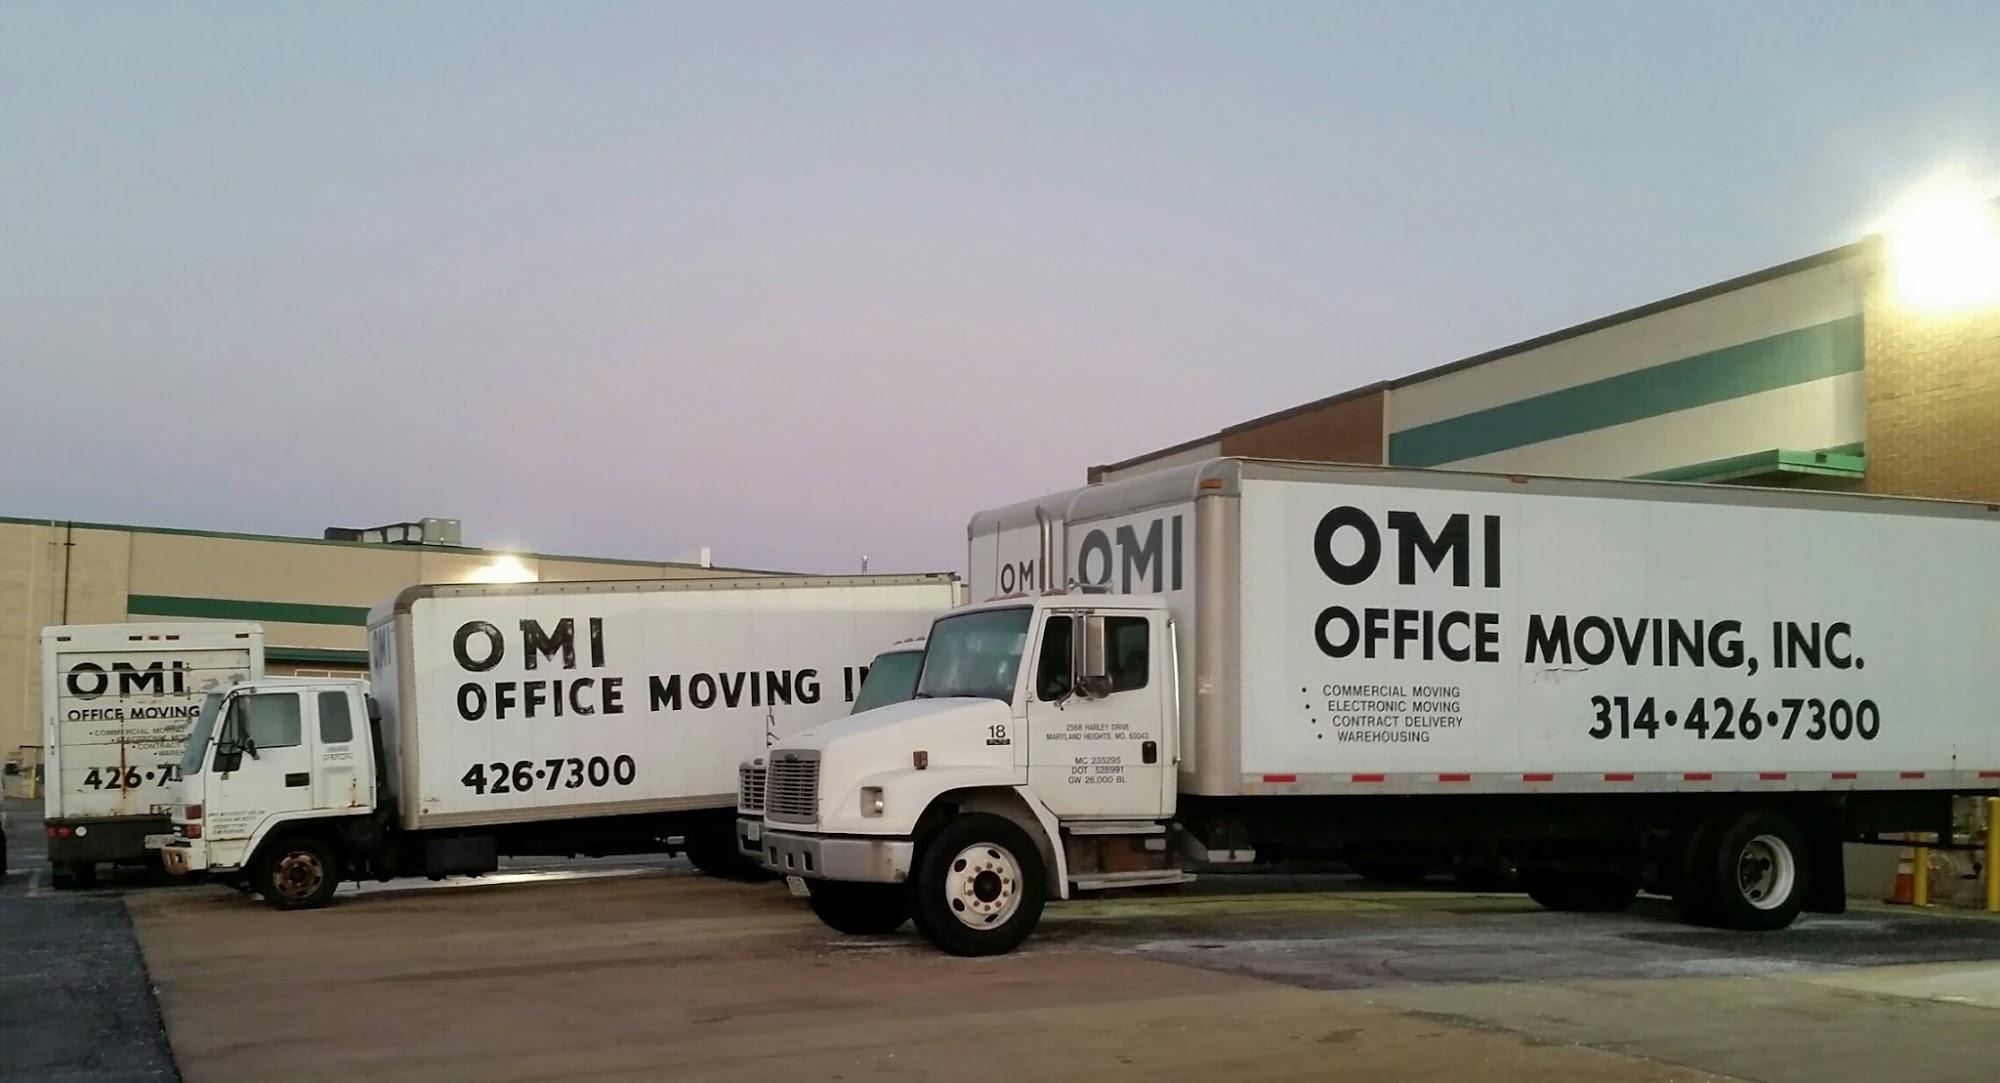 Office Moving Inc